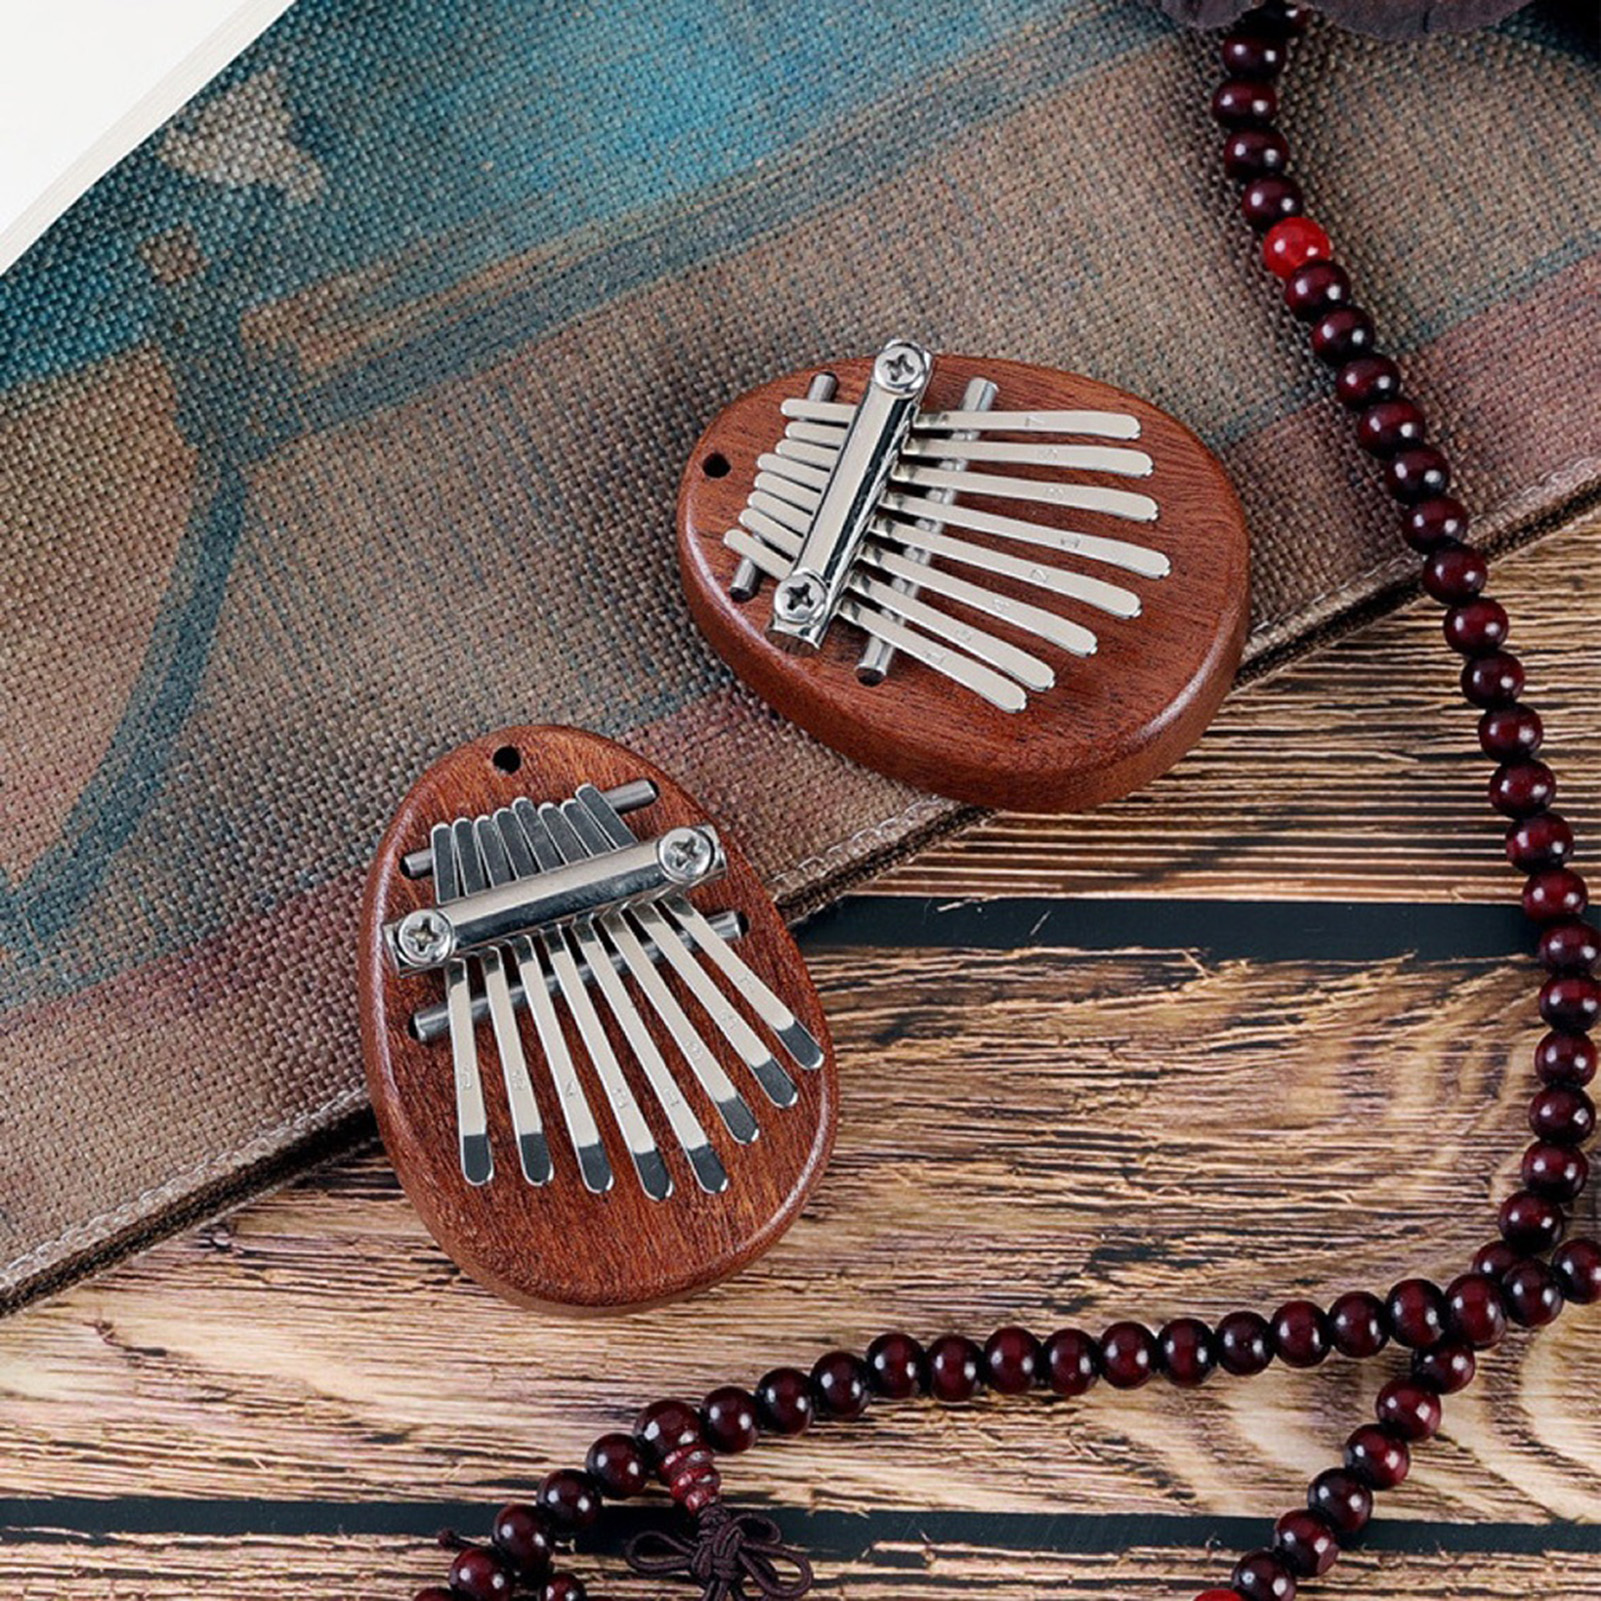 SANWOOD Thumb Piano Exquisite Fine Workmanship Musical Instrument Kalimba Finger Thumb Piano for Kids Adults Beginners - image 4 of 6